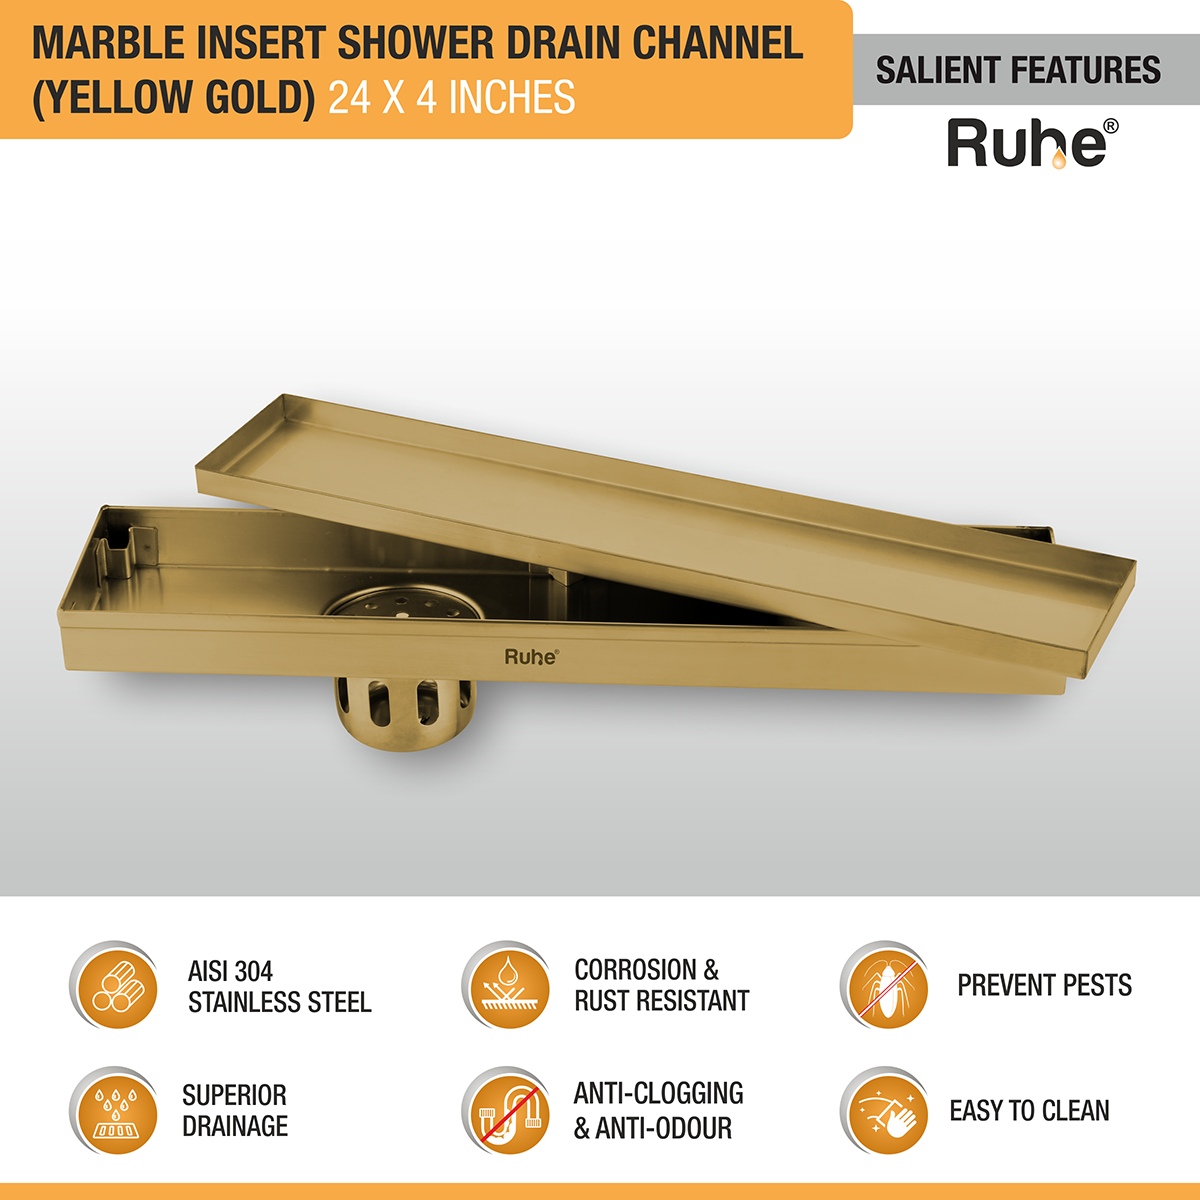 Marble Insert Shower Drain Channel (24 x 4 Inches) YELLOW GOLD PVD Coated features and benefits